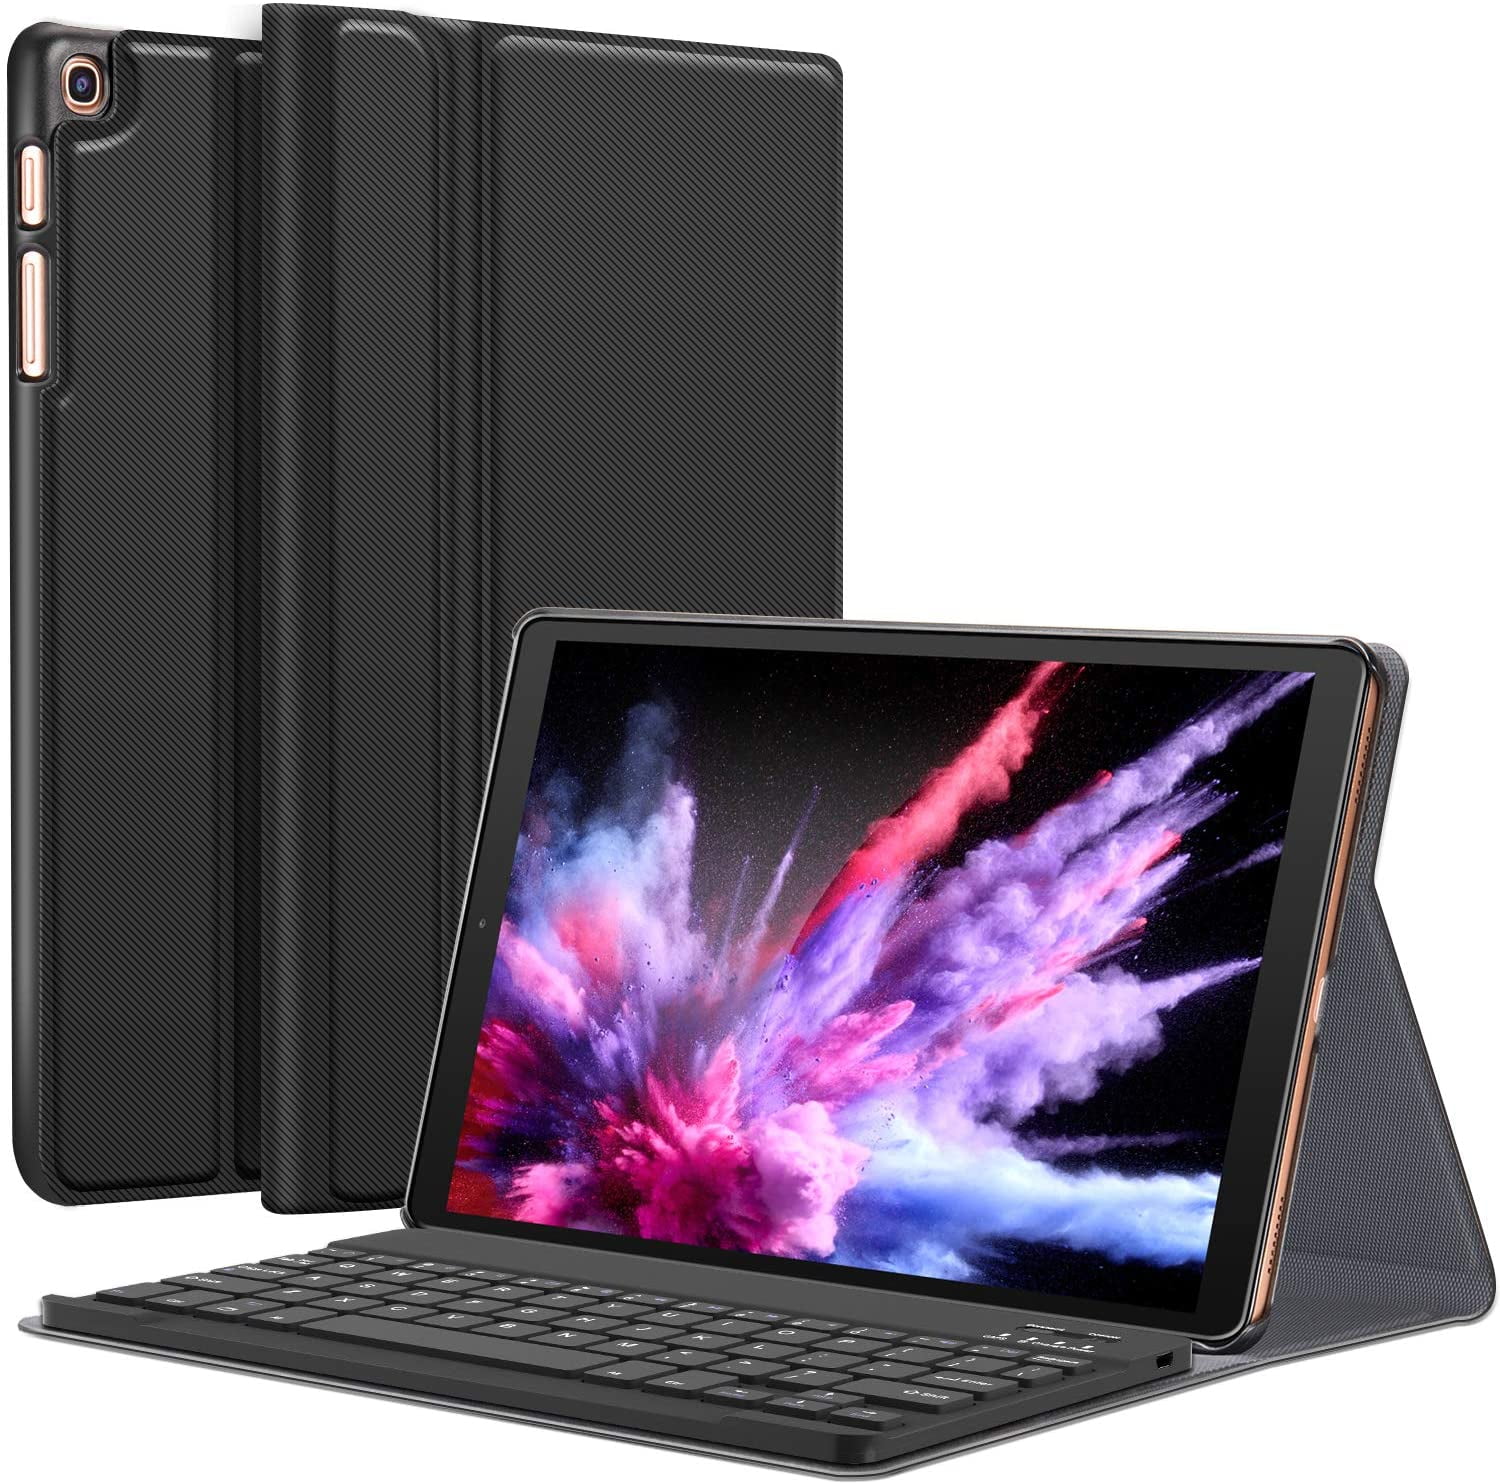 Andriod Tablet-Black CHESONA Galaxy Tab A 10.1 Keyboard Case Compatible Samsung Galaxy Tab A 10.1 inch SM-T580/T585 Ultra Slim PU Leather Stand Flip Detachable Wireless Keyboard Cover No S Pen 